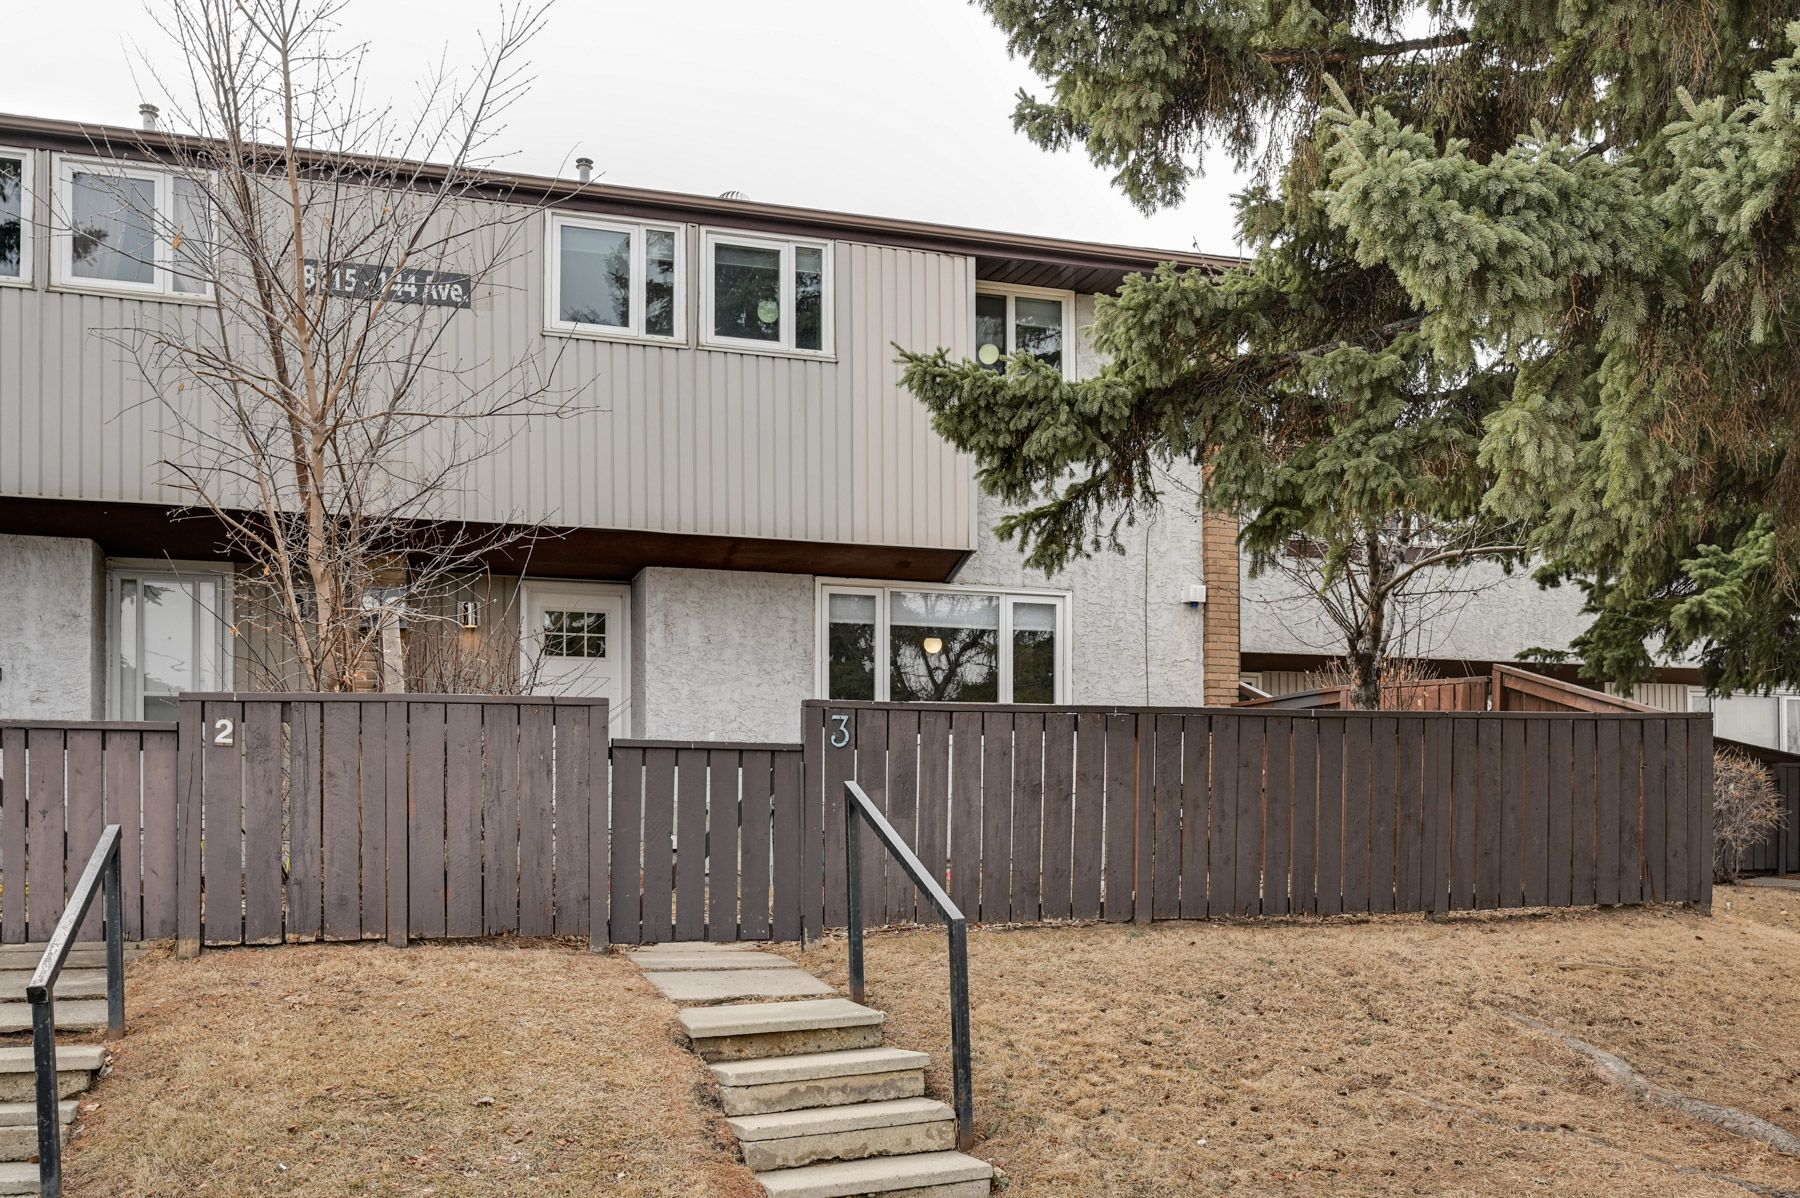 Main Photo: #3, 8115 144 Ave NW: Edmonton Townhouse for sale : MLS®# E4235047